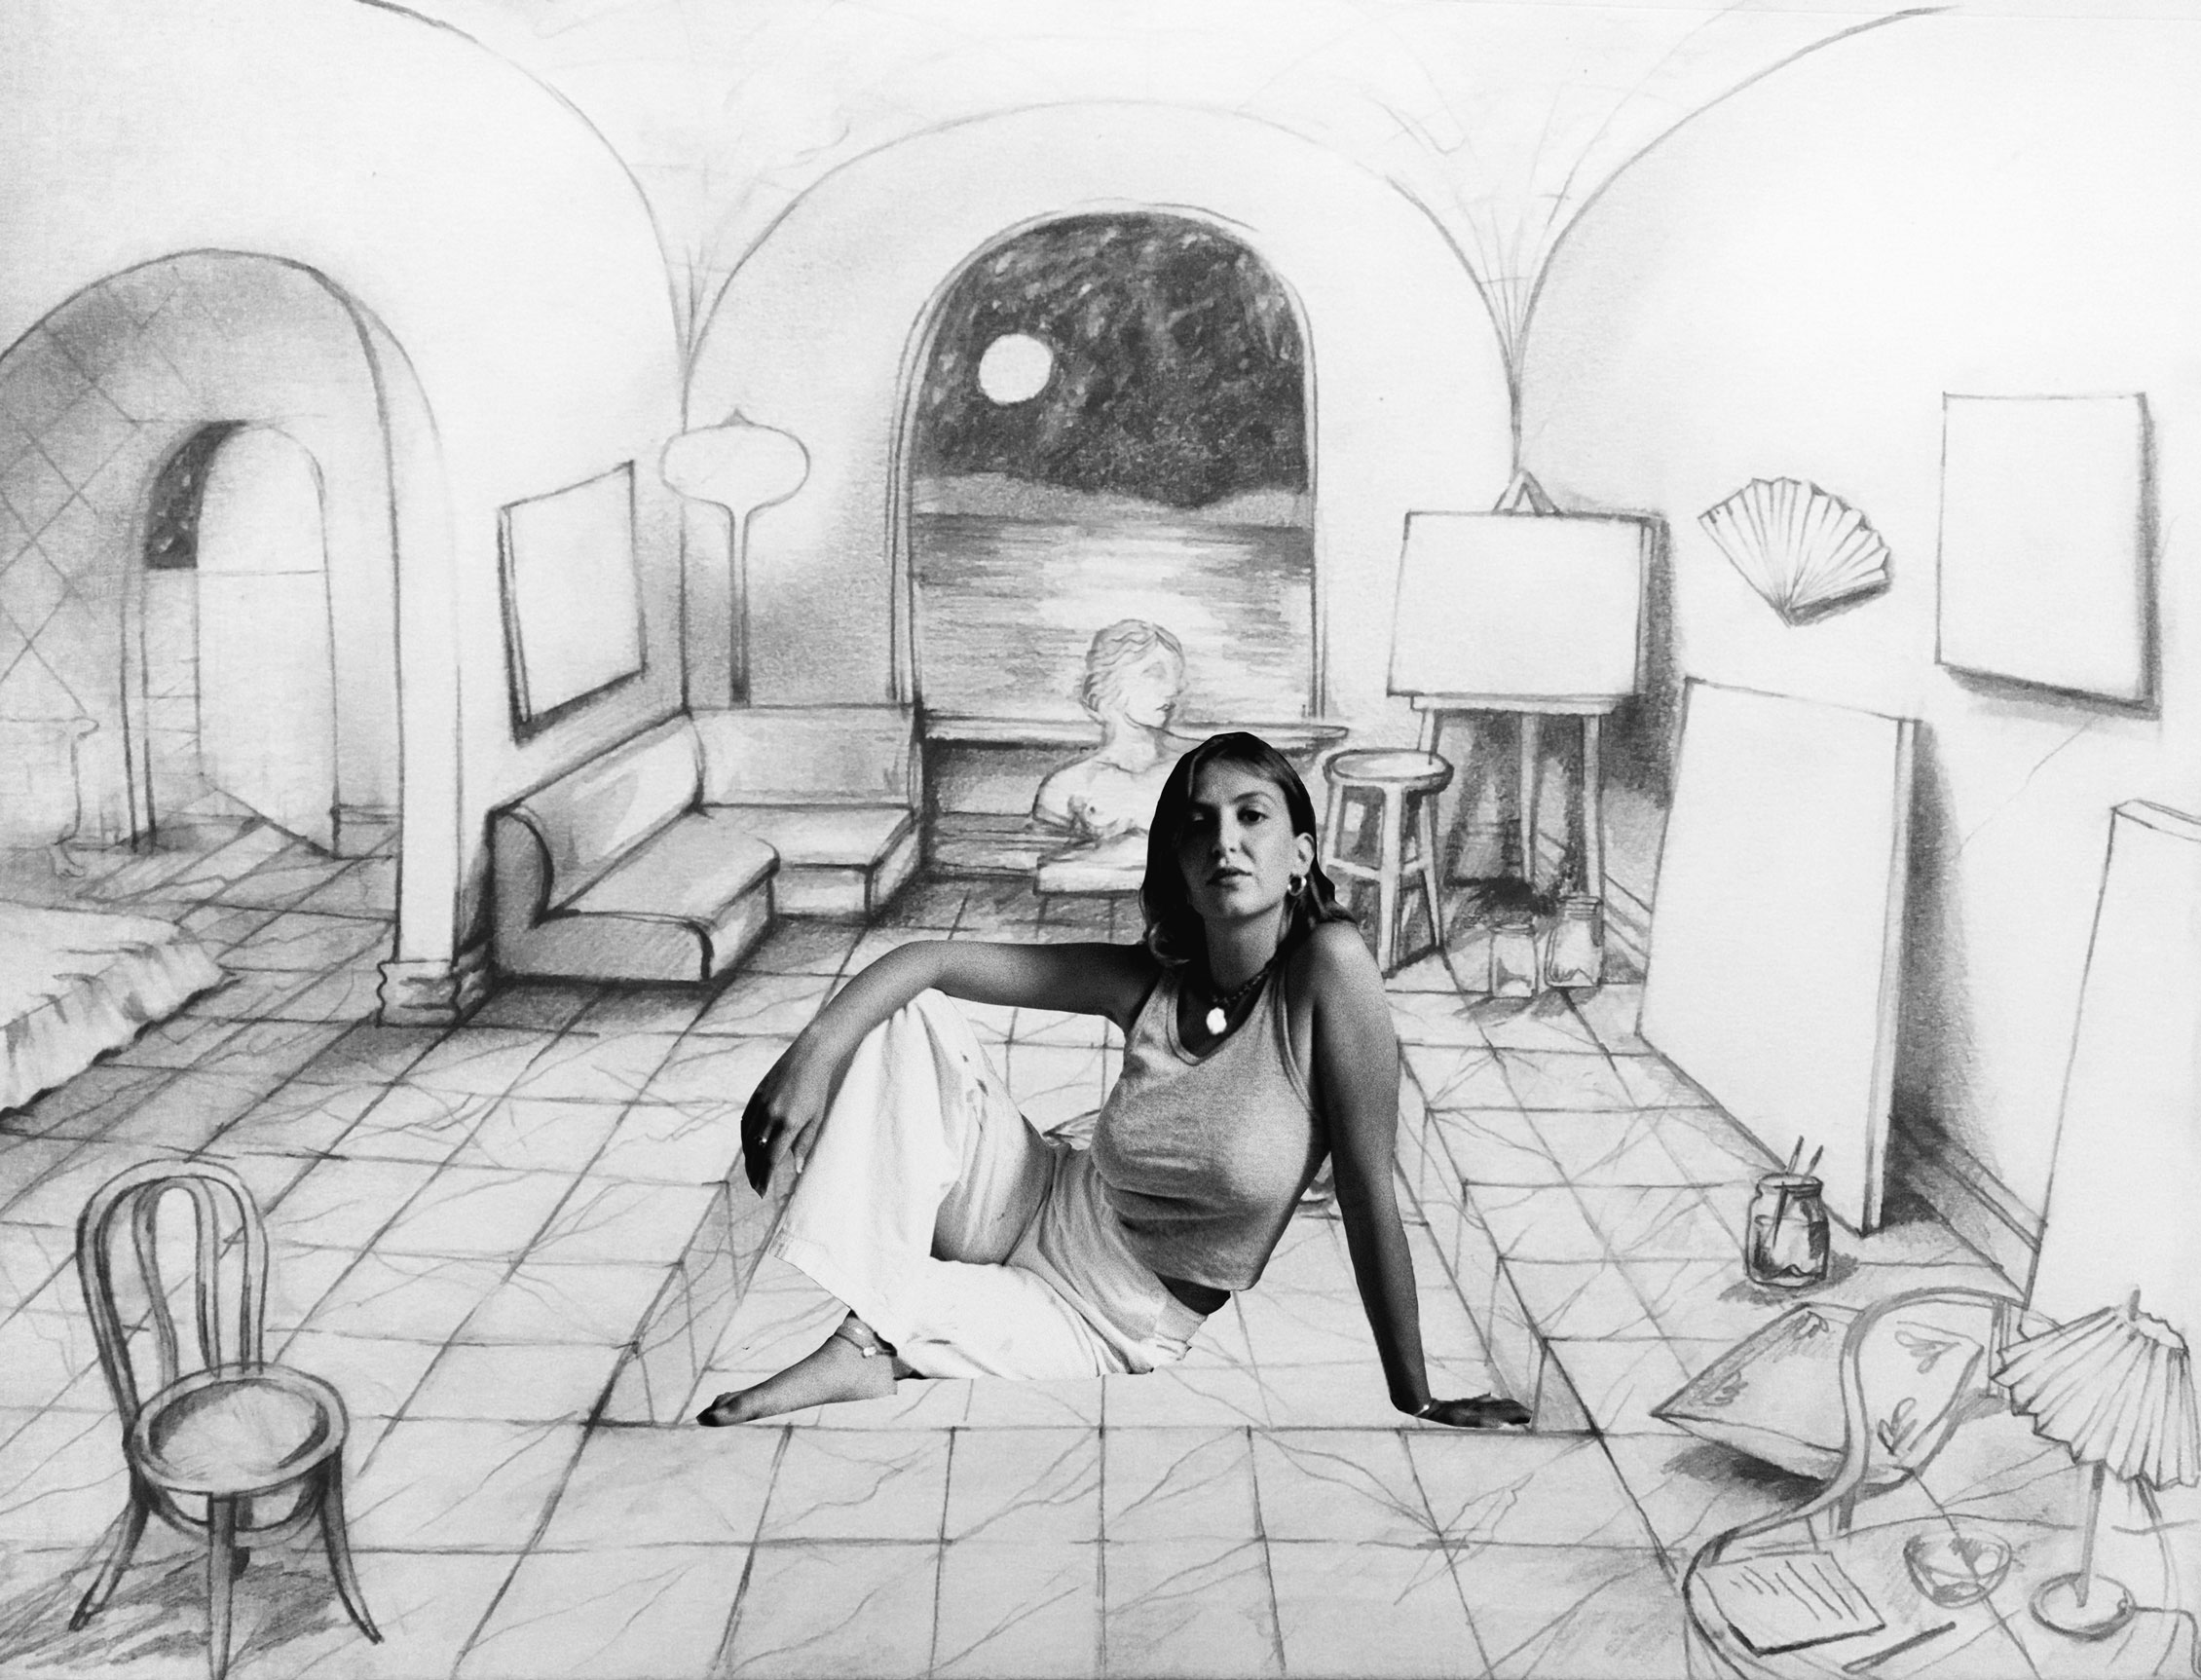 AMS in Dream Studio, 2019. Photo by Danielle Aphrodite Nemet, drawing by Andrea Smith.